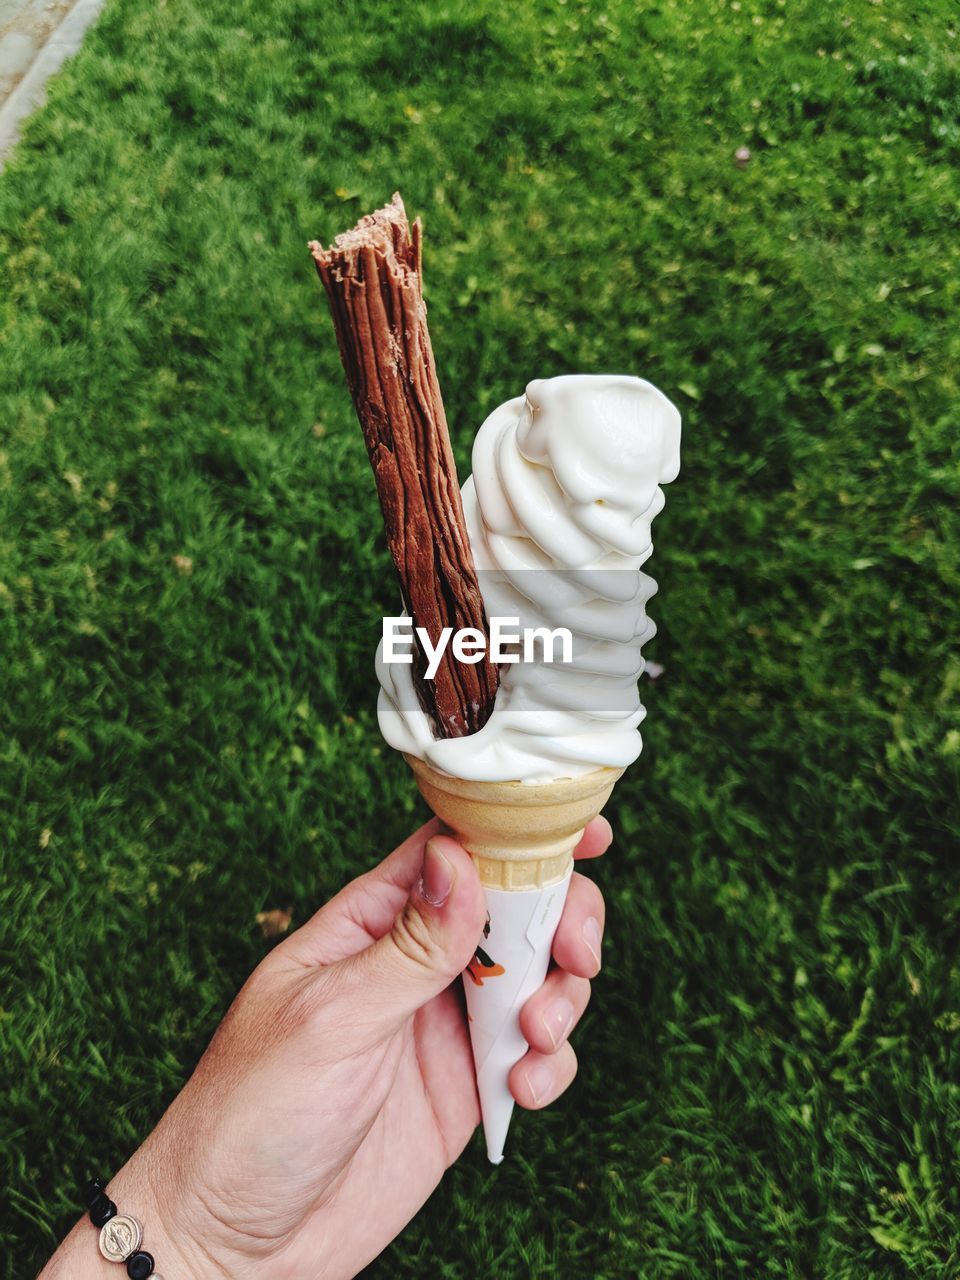 CLOSE-UP OF HAND HOLDING ICE CREAM CONE AGAINST TREES